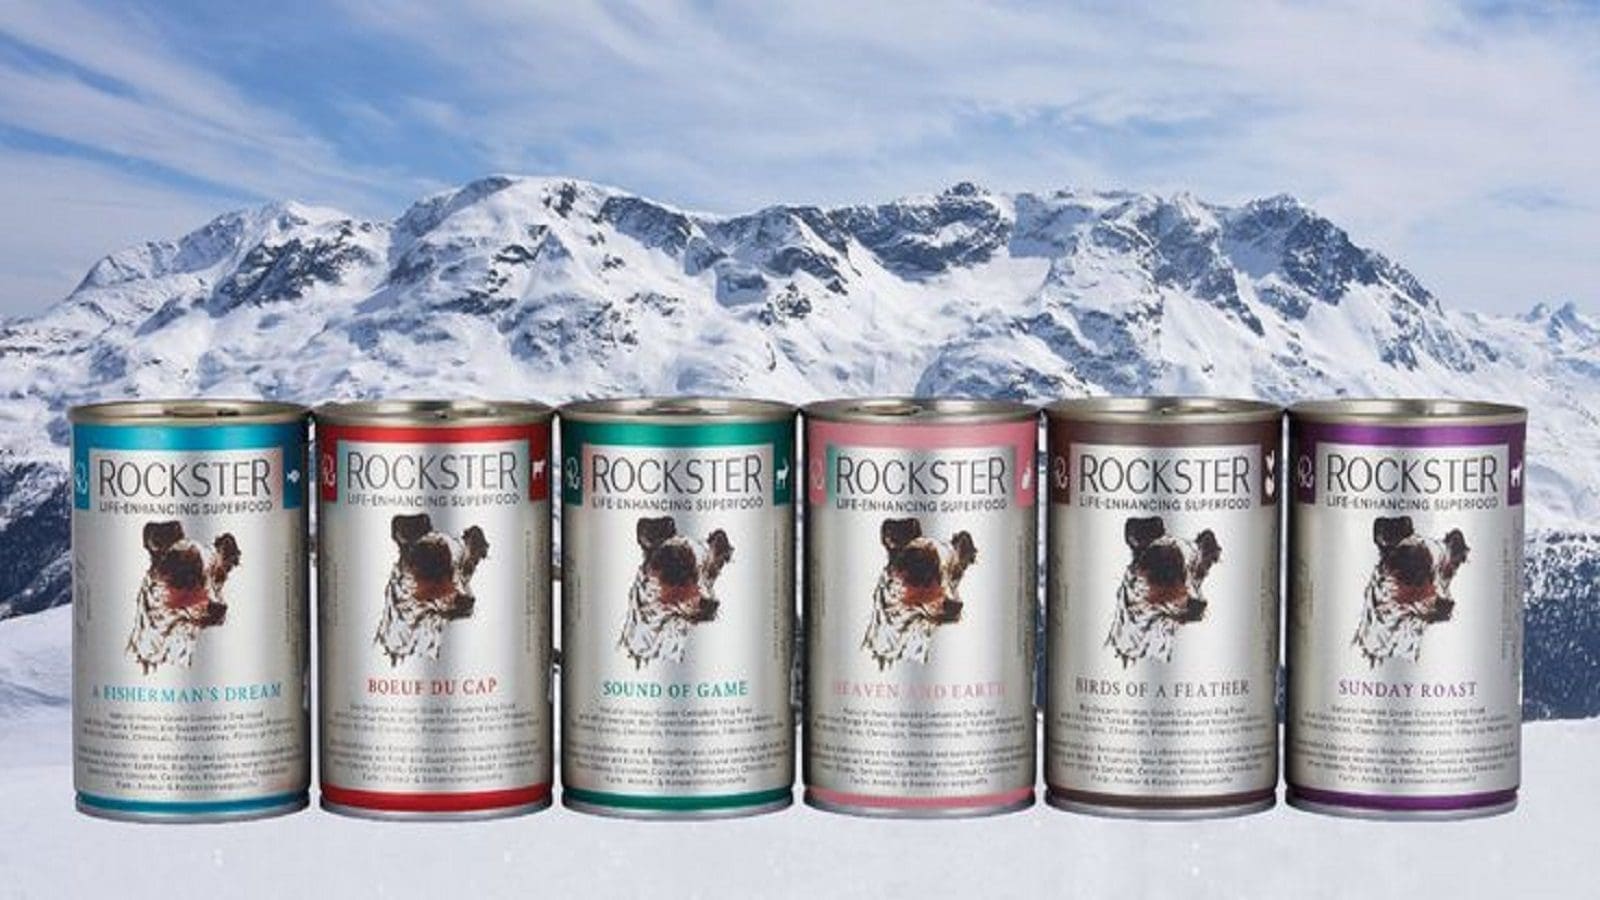 The Rockster launches ‘World’s first’ bio-organic dog food in United States